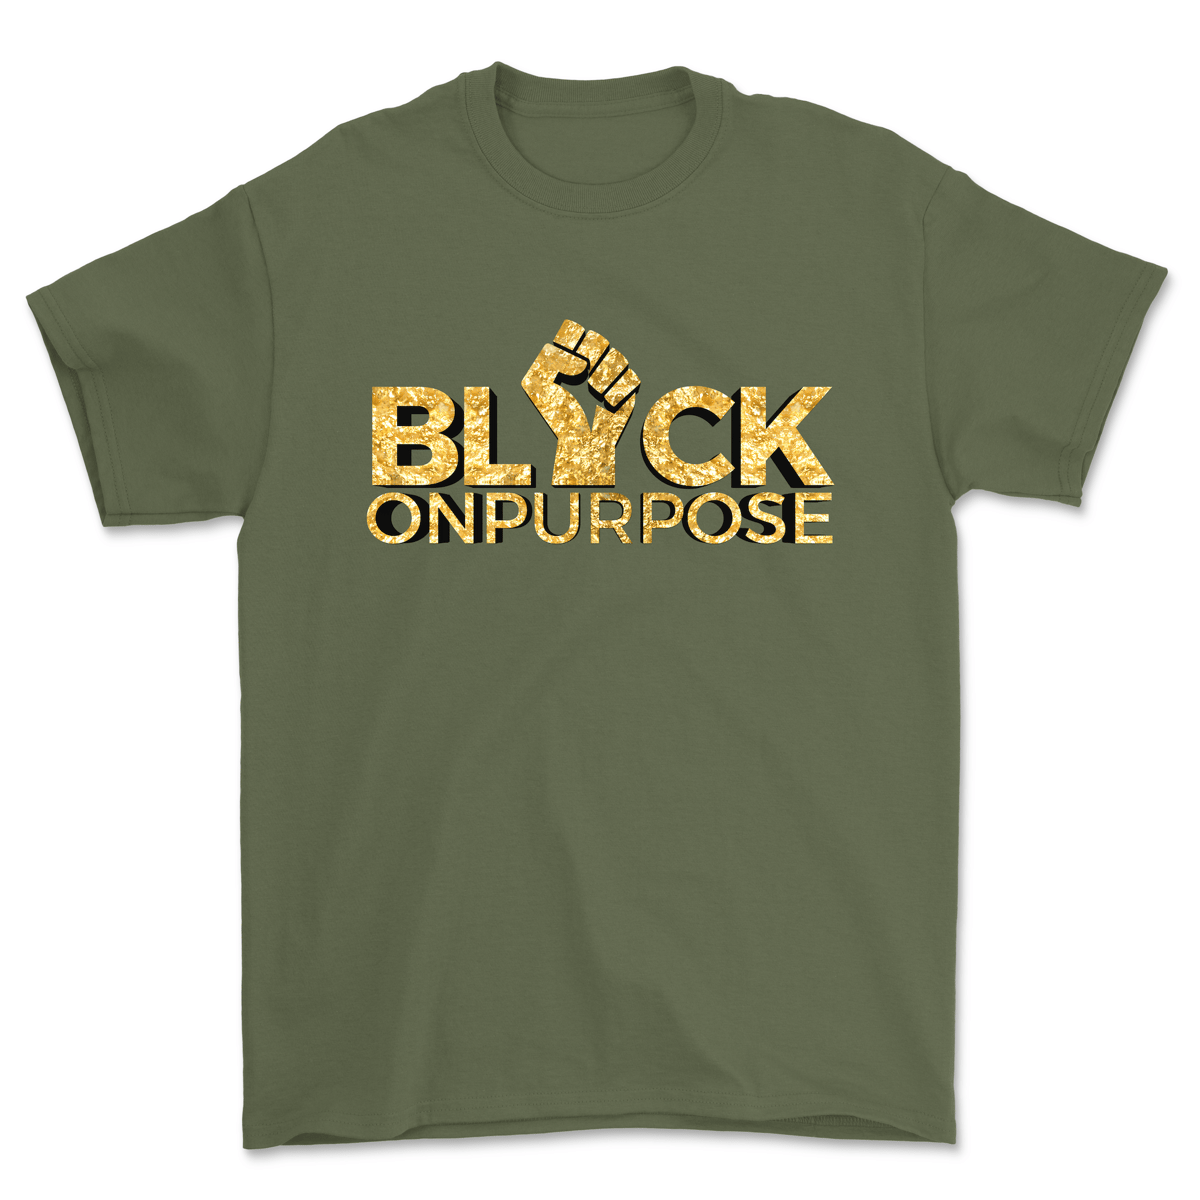 Image of Adult Military Green Gold "Black On Purpose" Tee